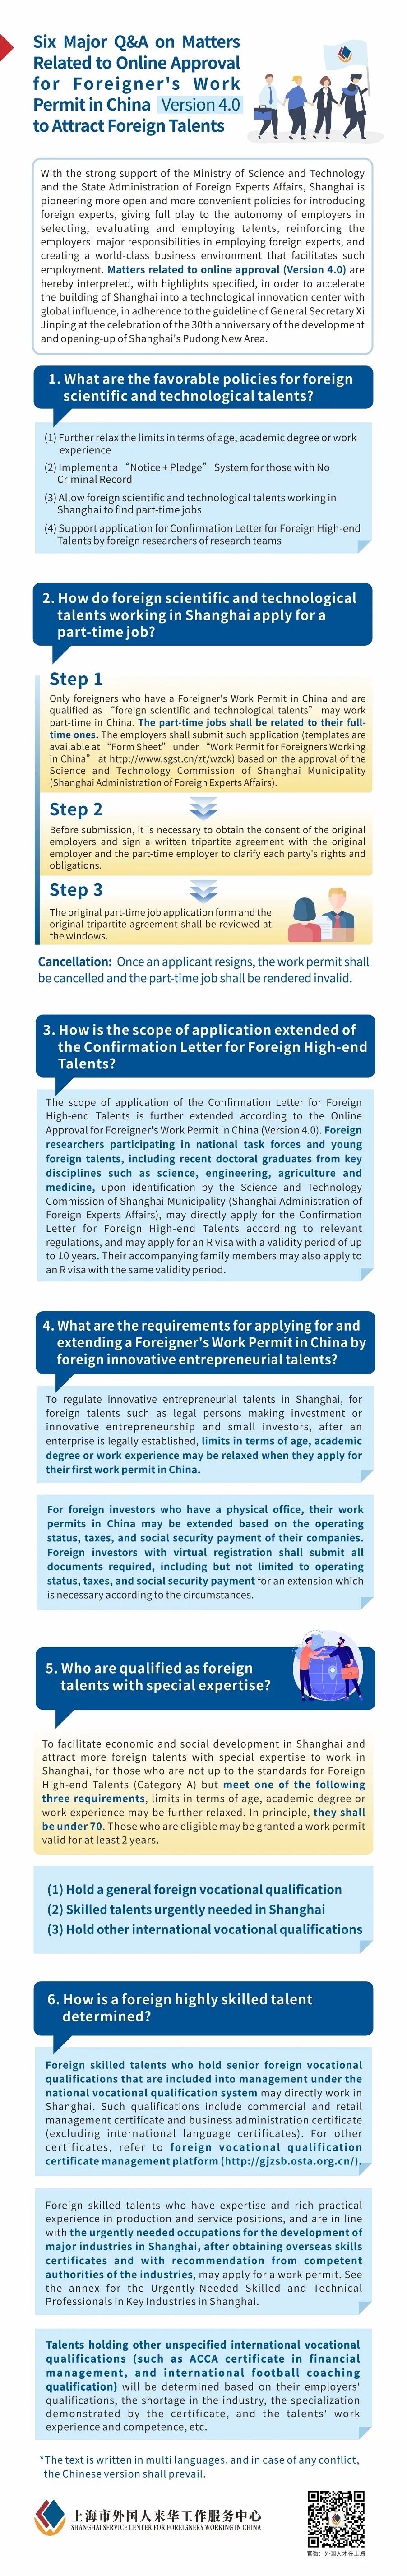 Q&A on Online Approval for Foreigner's Work Permit in China.webp.jpg